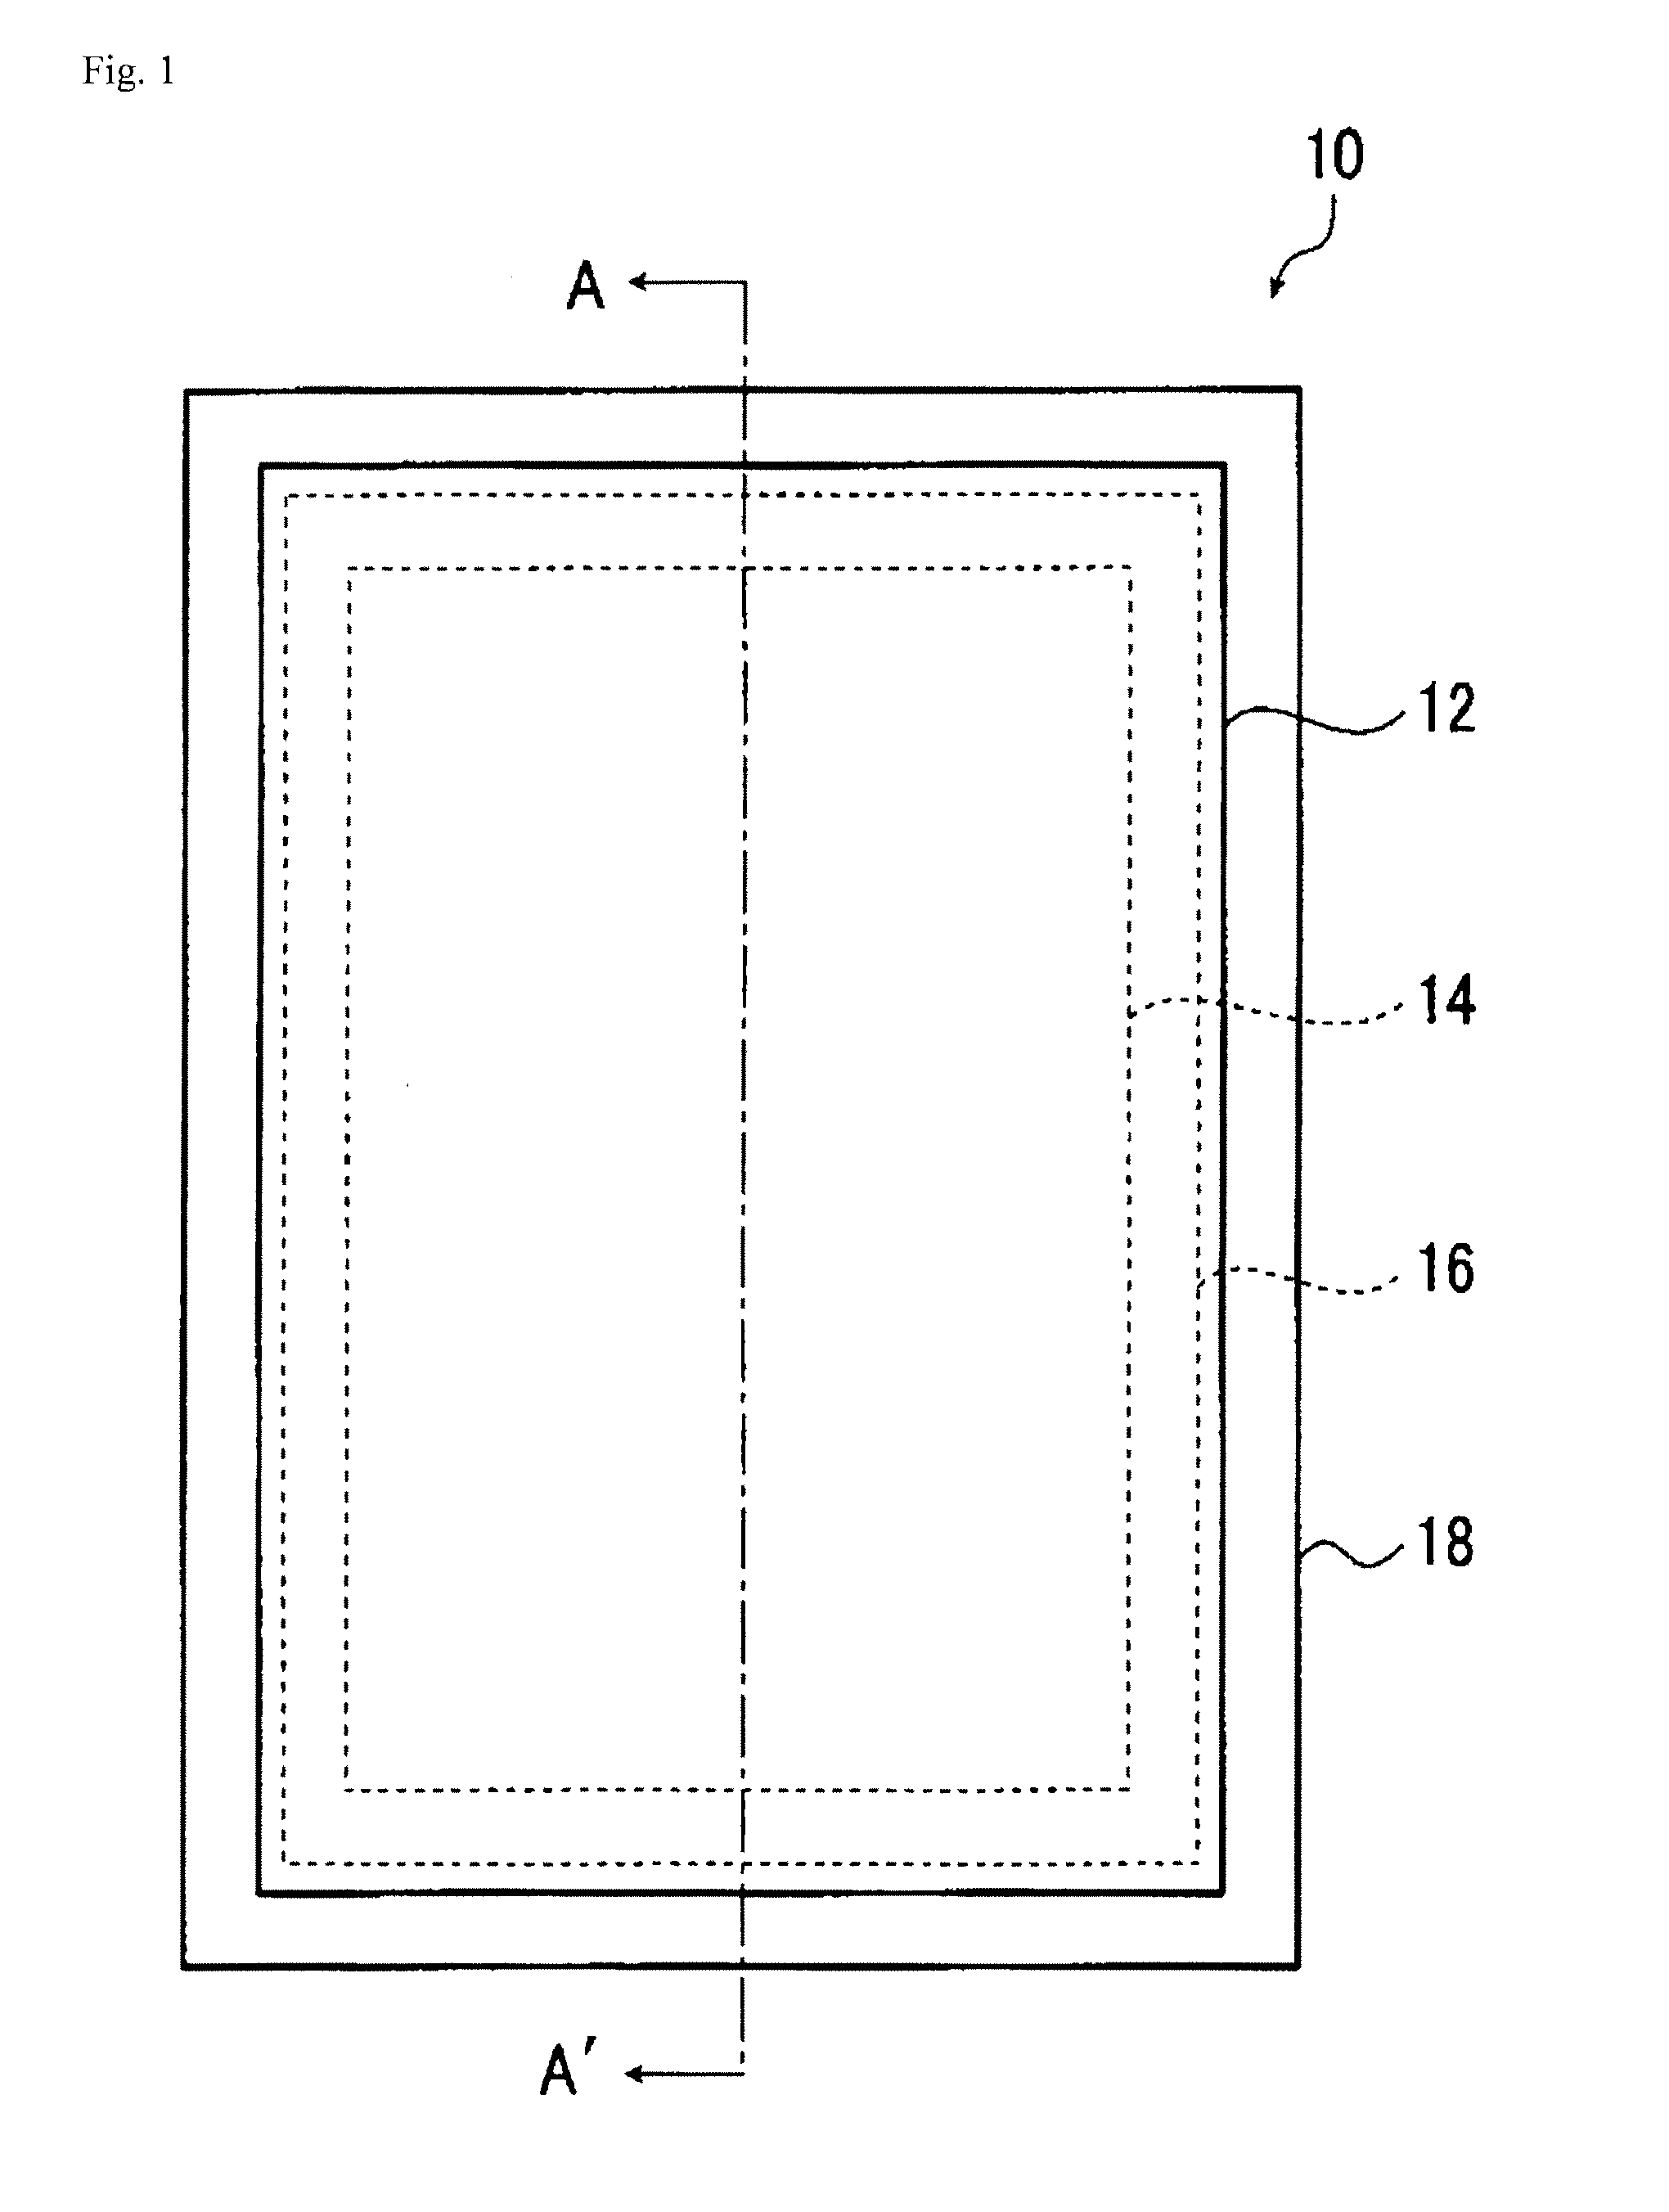 Glass laminate, display panel with support, method for producing glass laminate and method for manufacturing display panel with support